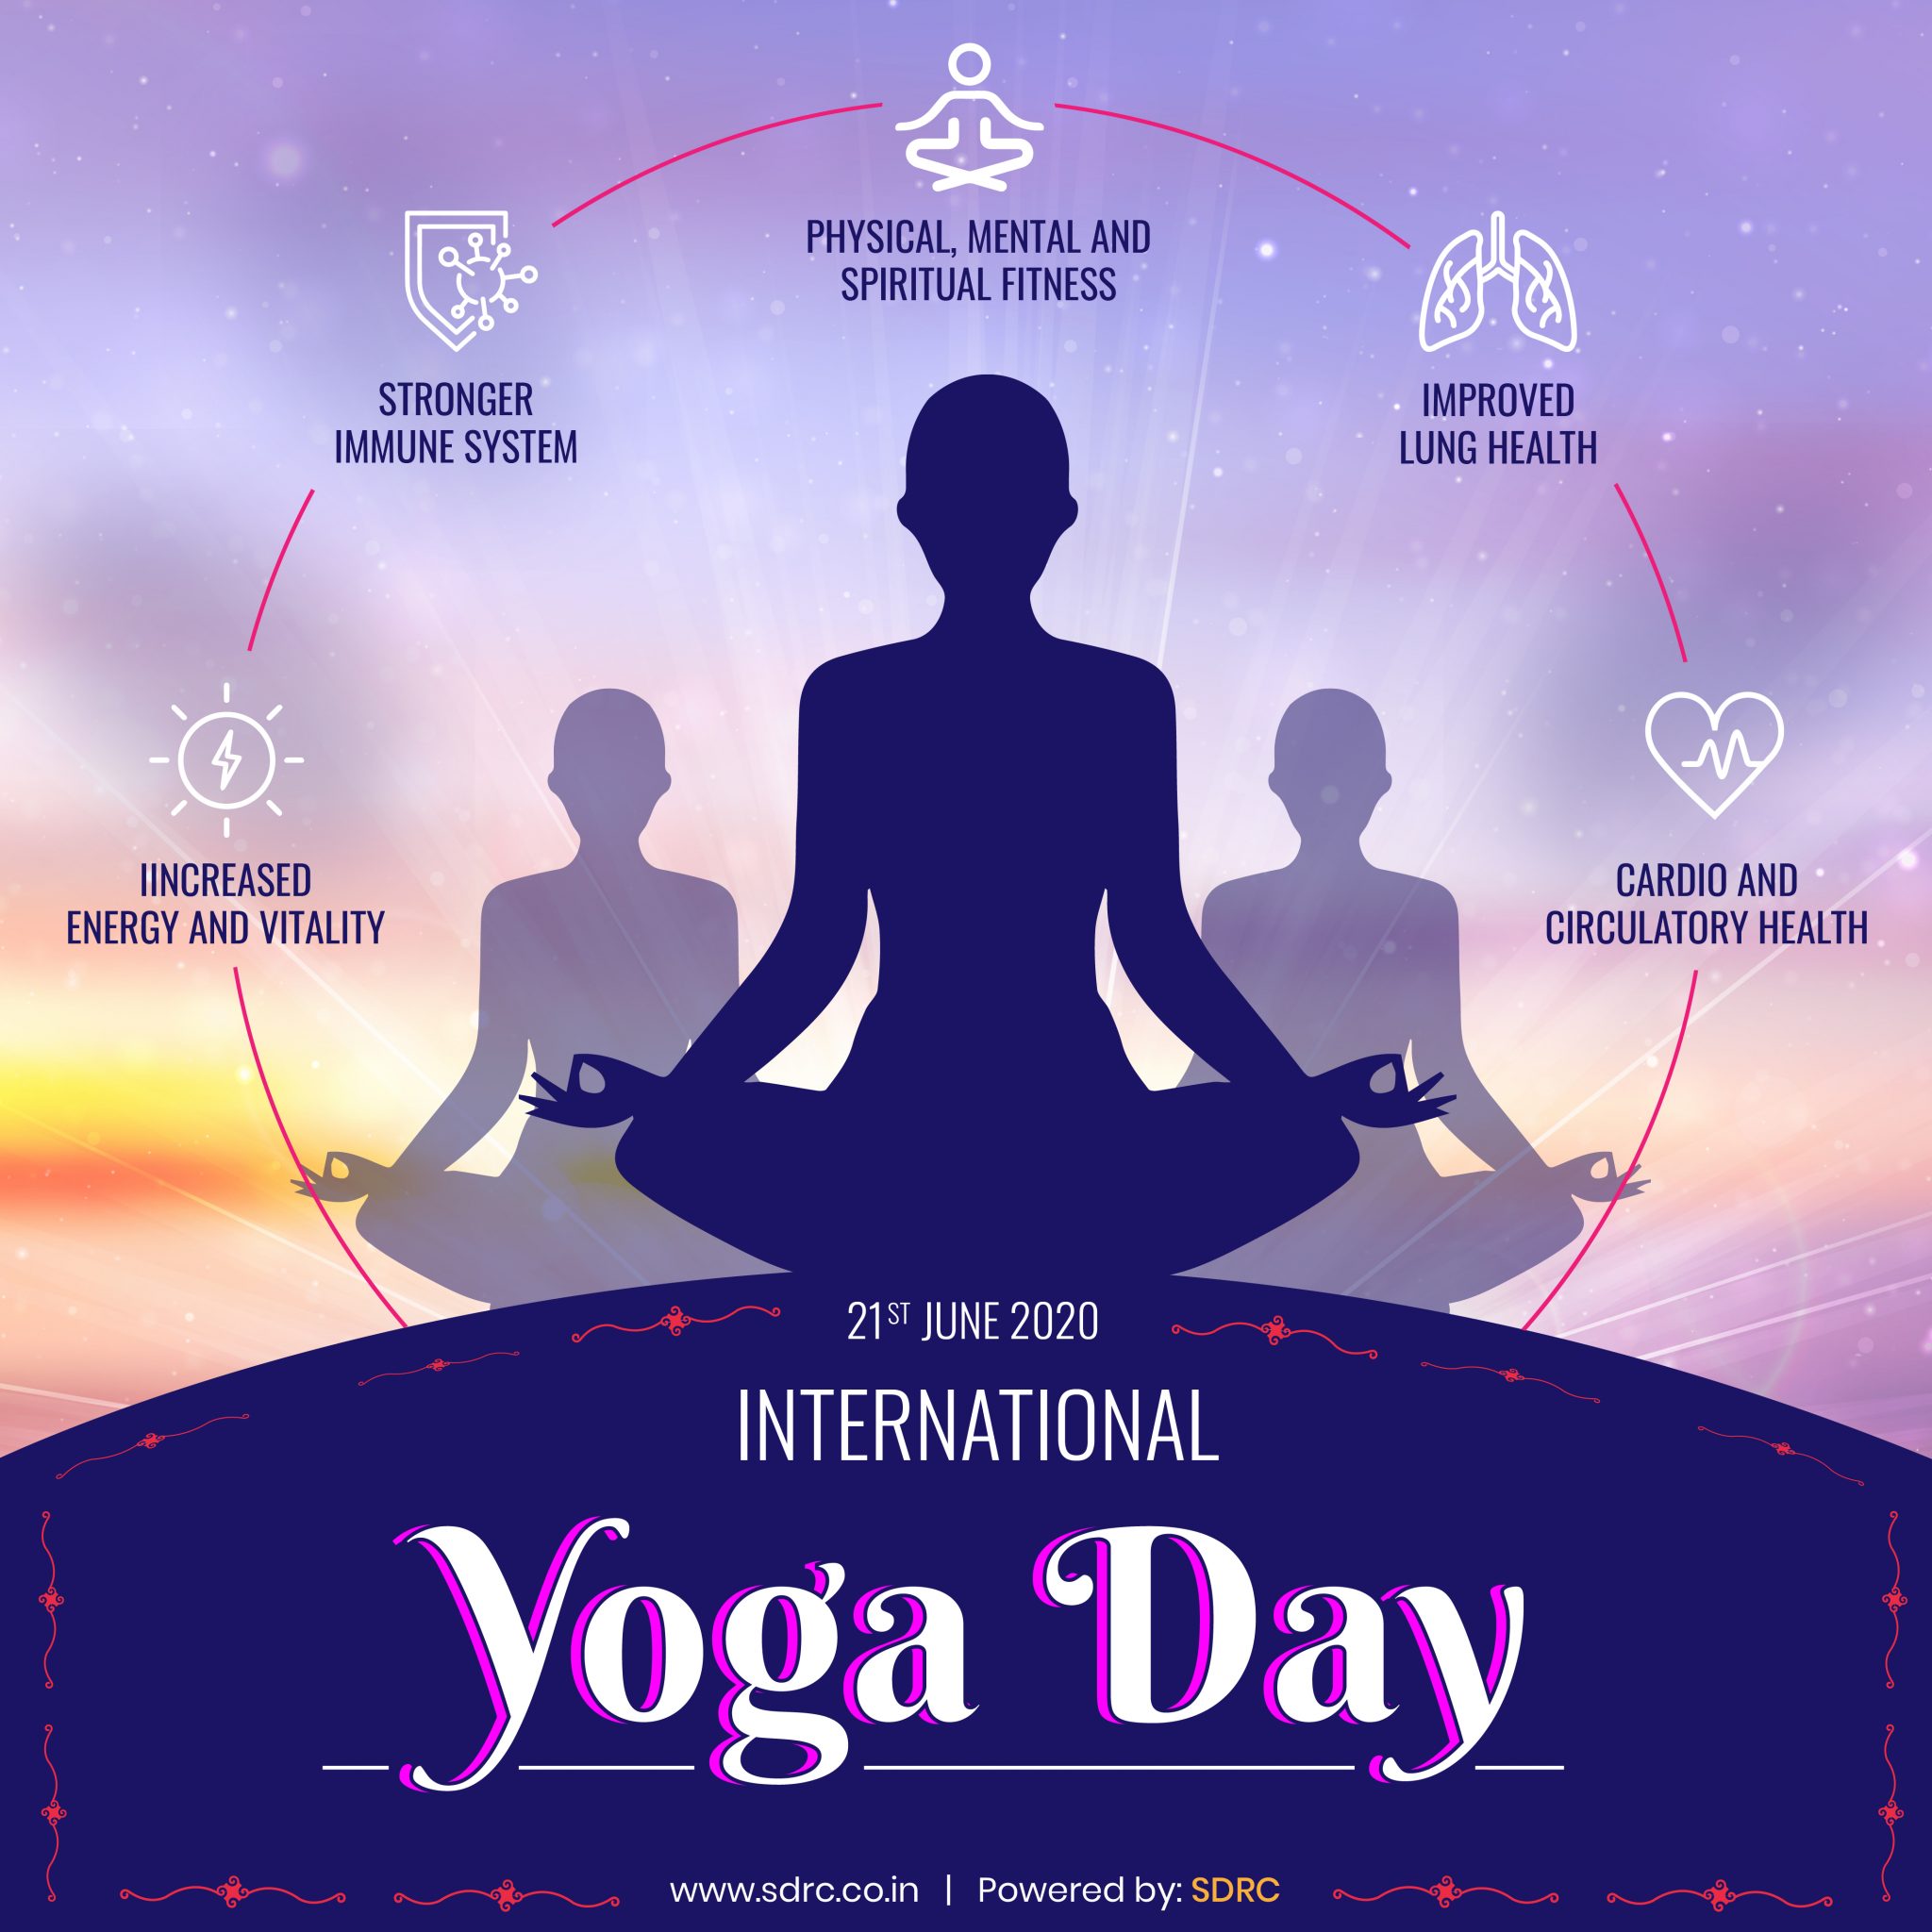 What is the theme of International Yoga Day?